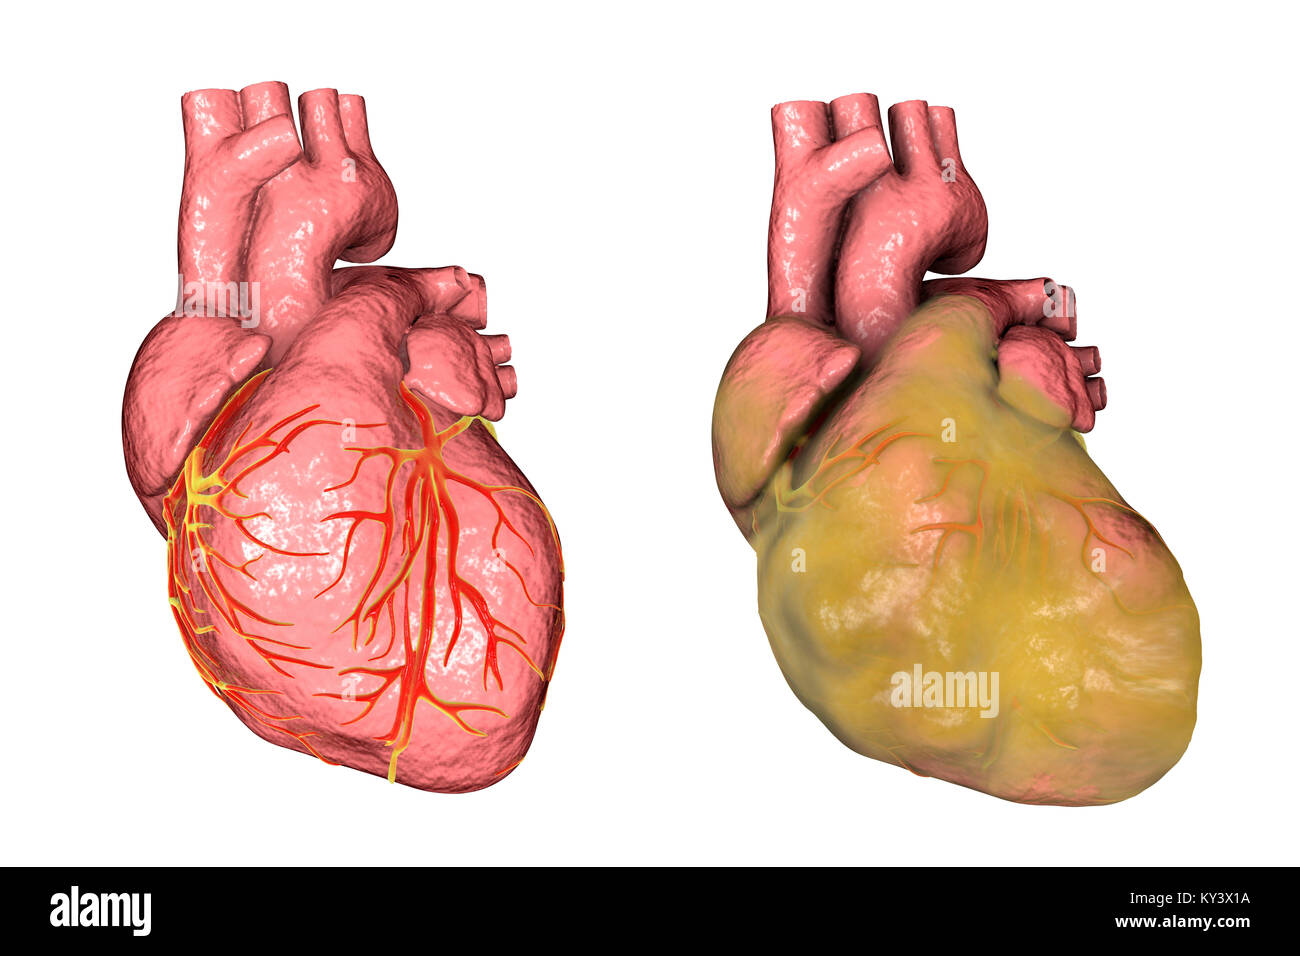 Healthy heart (left) and heart with left ventricular hypertrophy and fat layer (right), computer illustration. Stock Photo